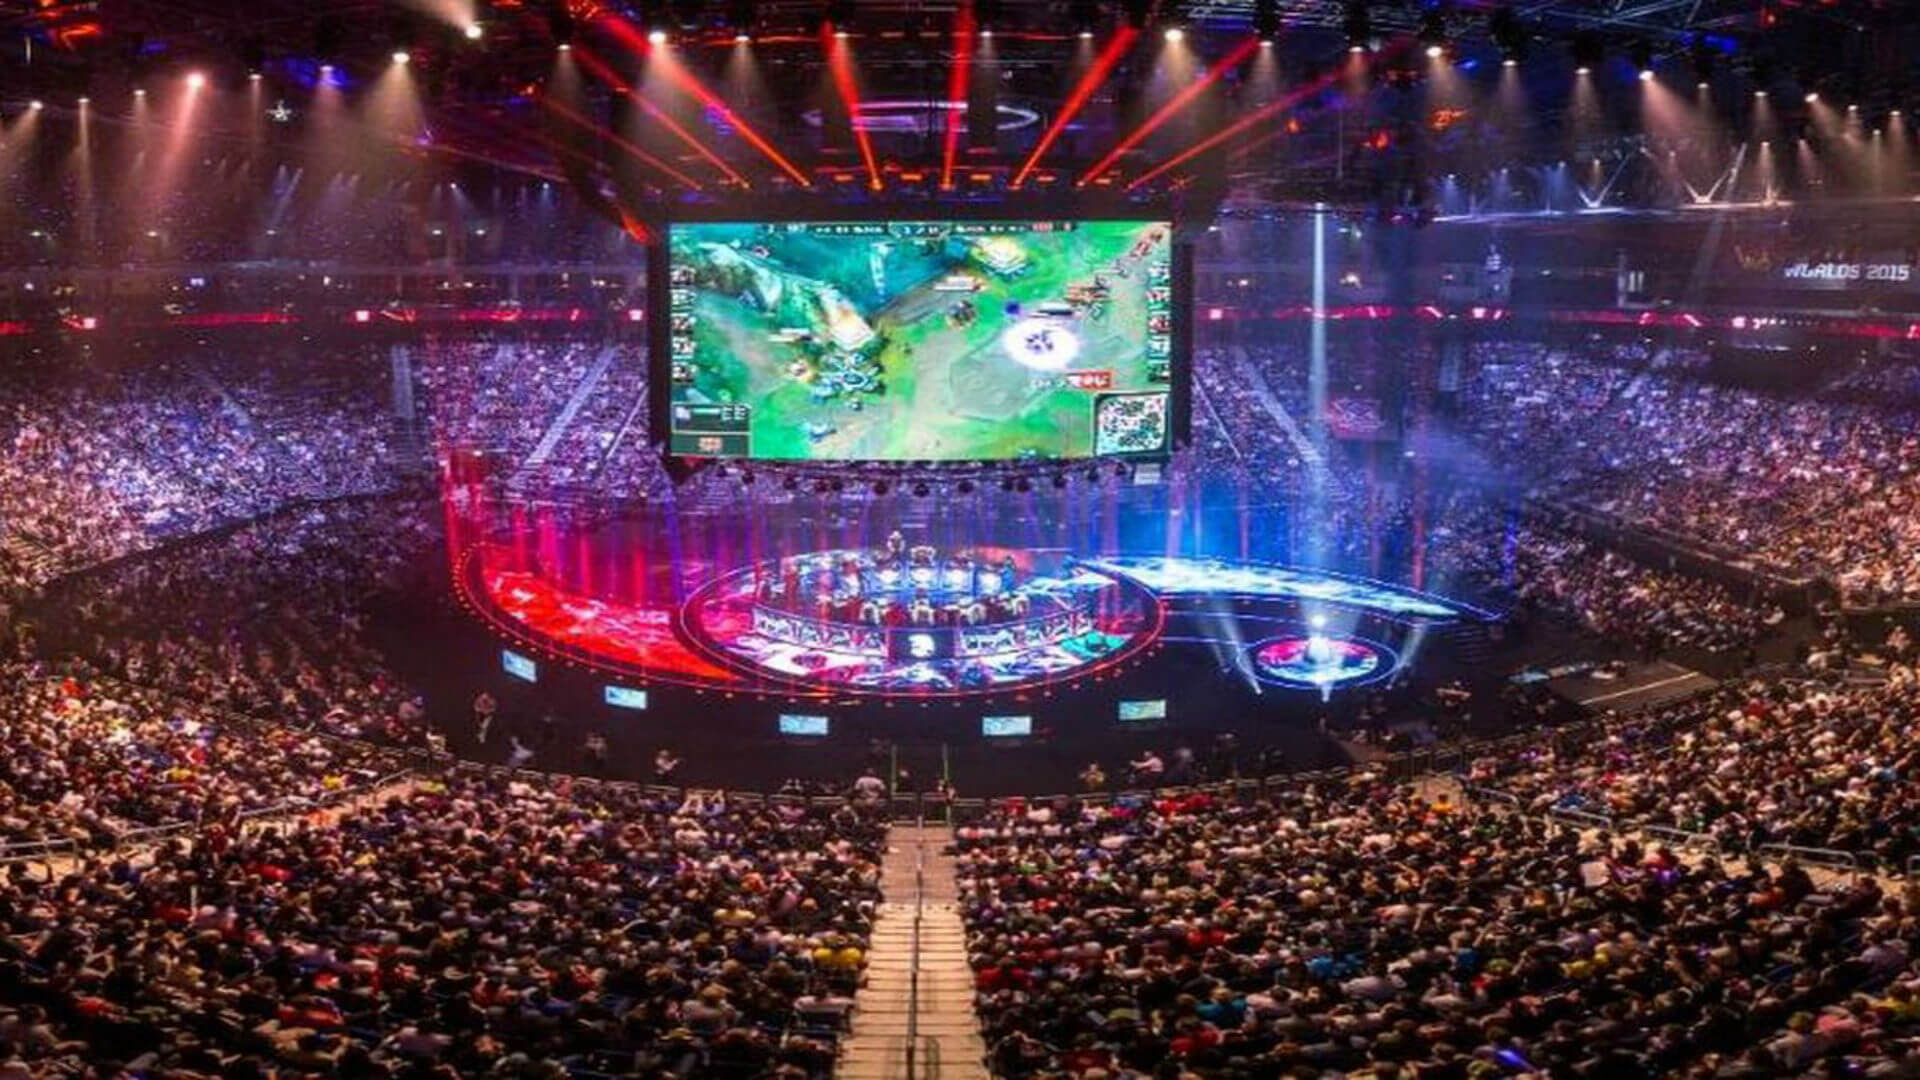 Louis Vuitton Partners With League of Legends for World